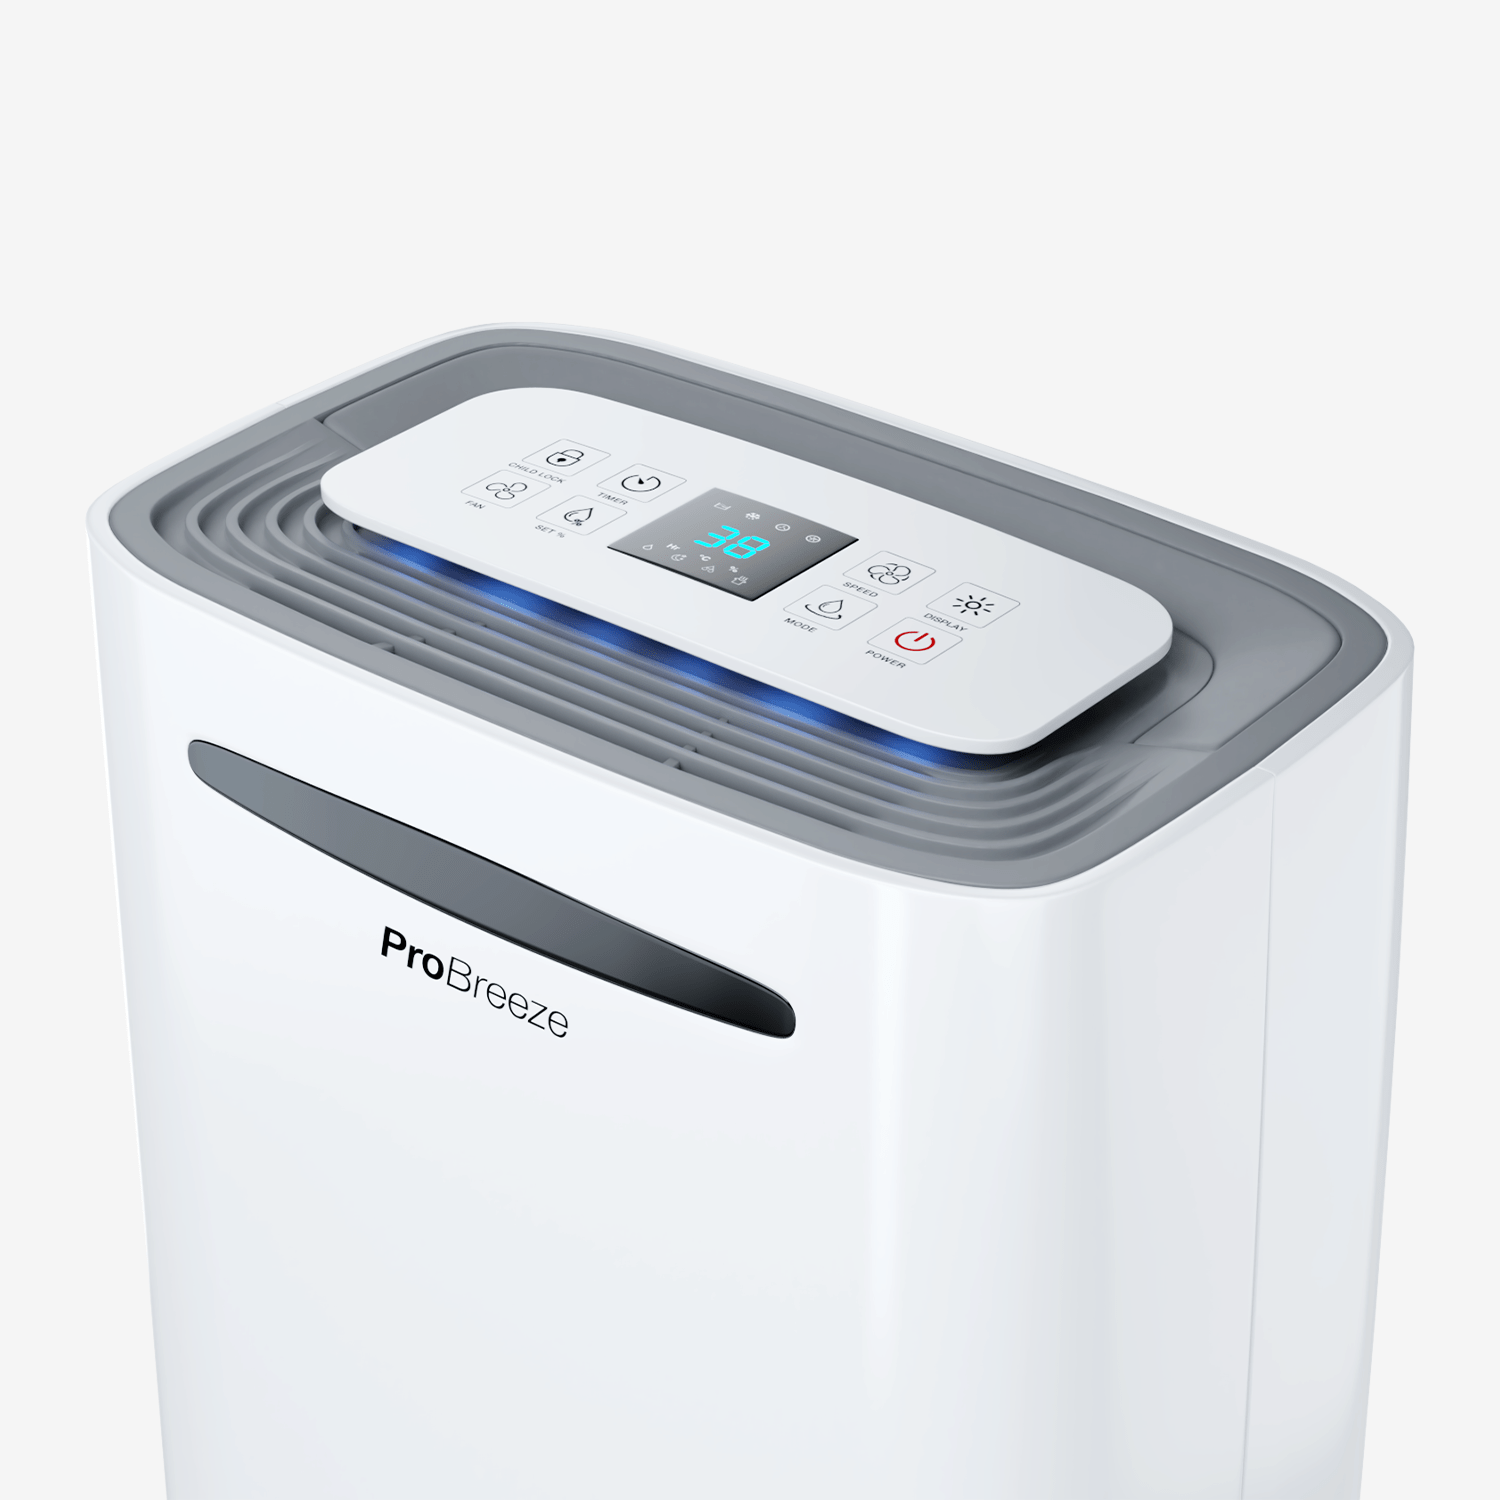 50 Pint/Day Dehumidifier - 2,000 Sq Ft Dehumidifiers for Home with Continuous Drainage